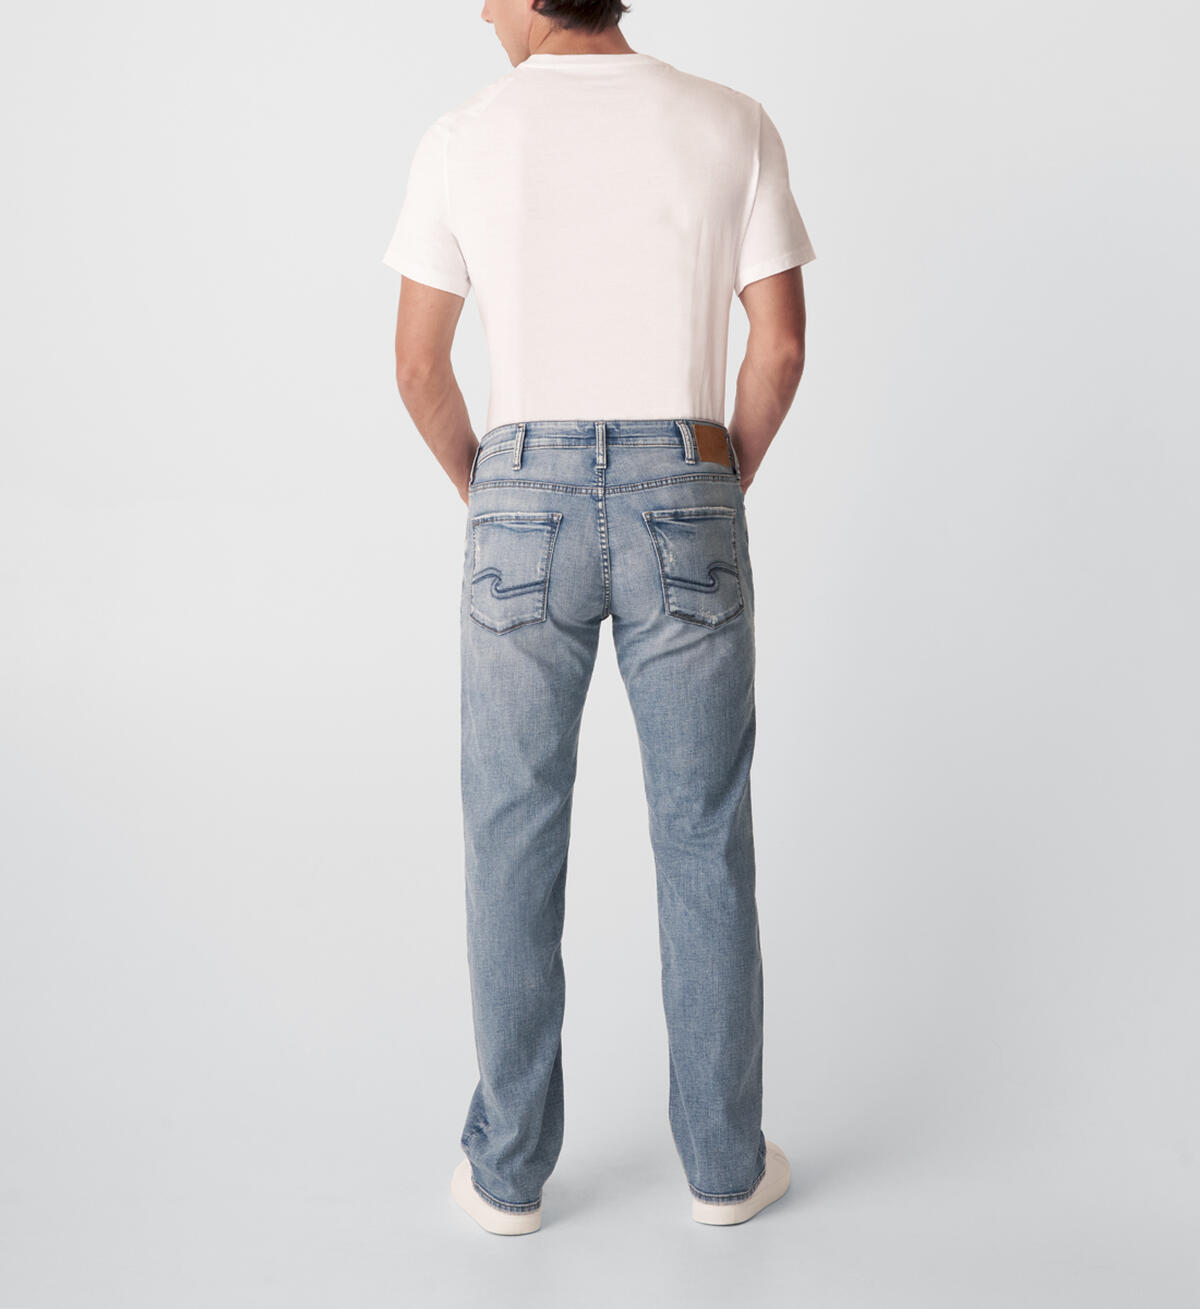 Allan Classic Fit Straight Leg Jeans, , hi-res image number 1